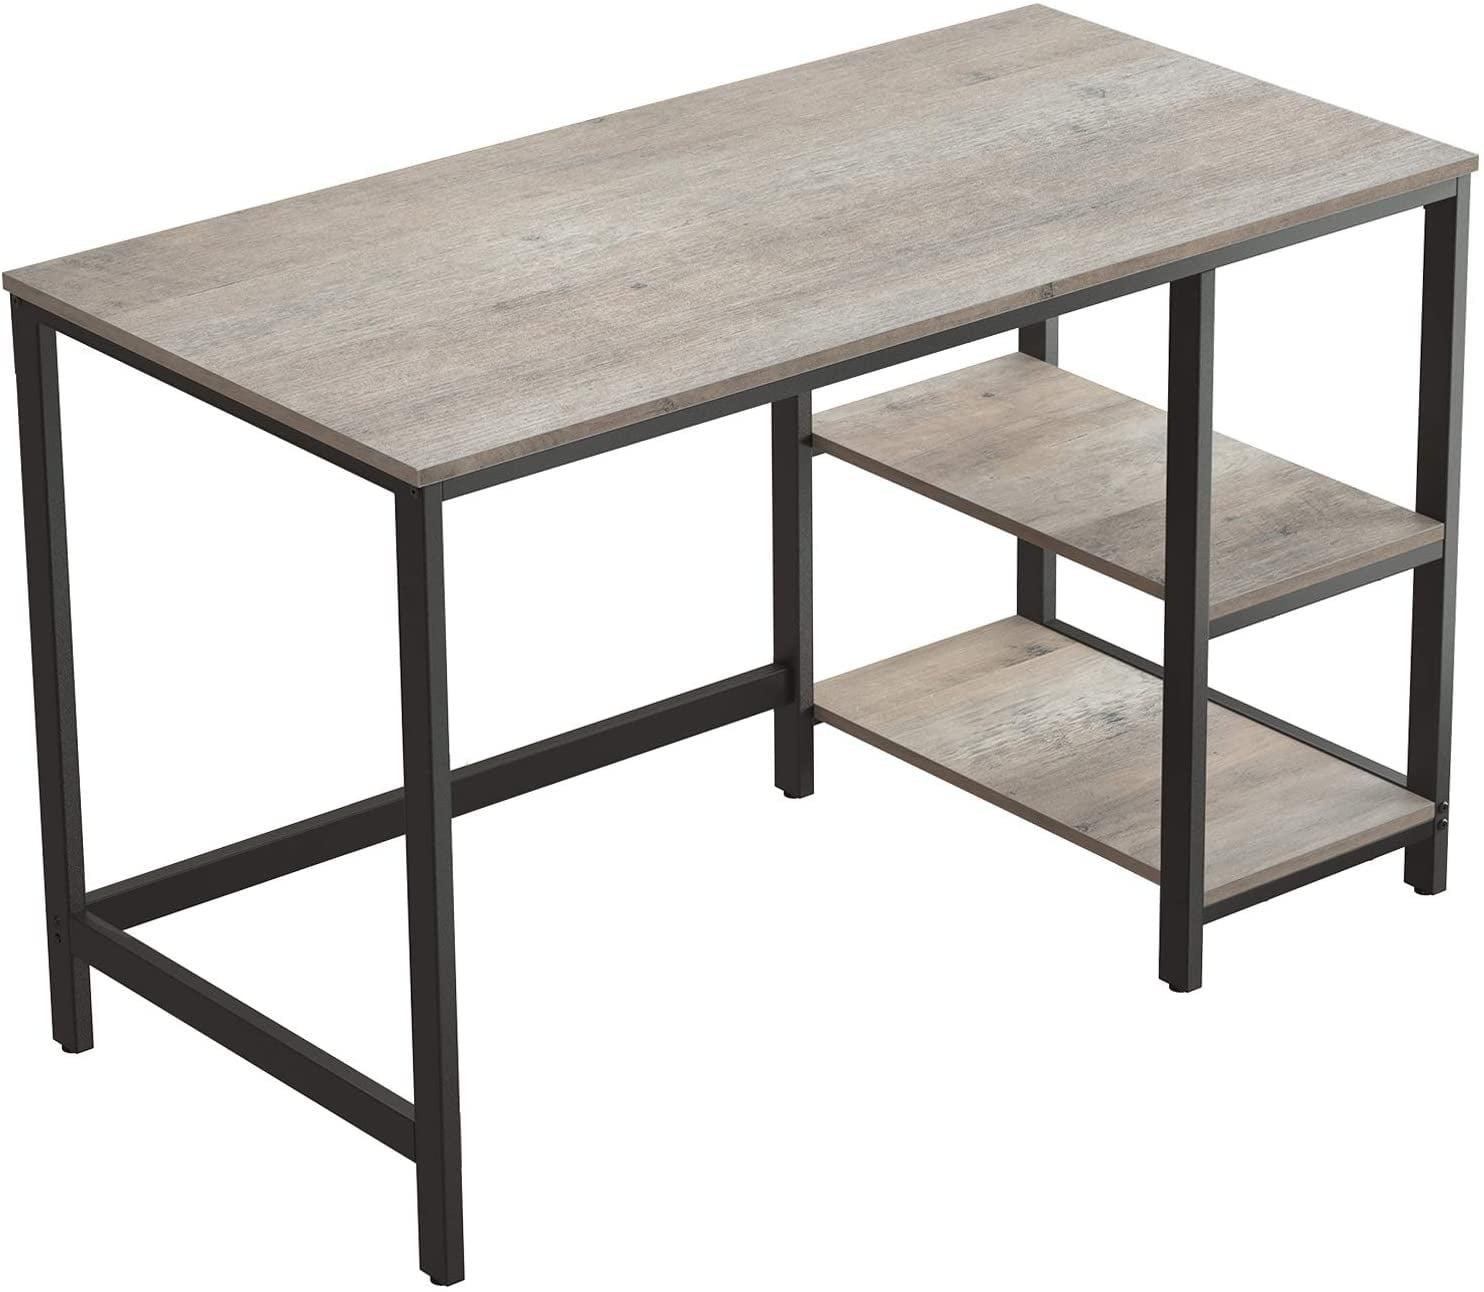 Greige and Black ULWD046B02 Industrial 39.4-Inch Long Home Office Desk for Study VASAGLE ALINRU Computer Desk Writing Desk with 2 Shelves on Left or Right Steel Frame